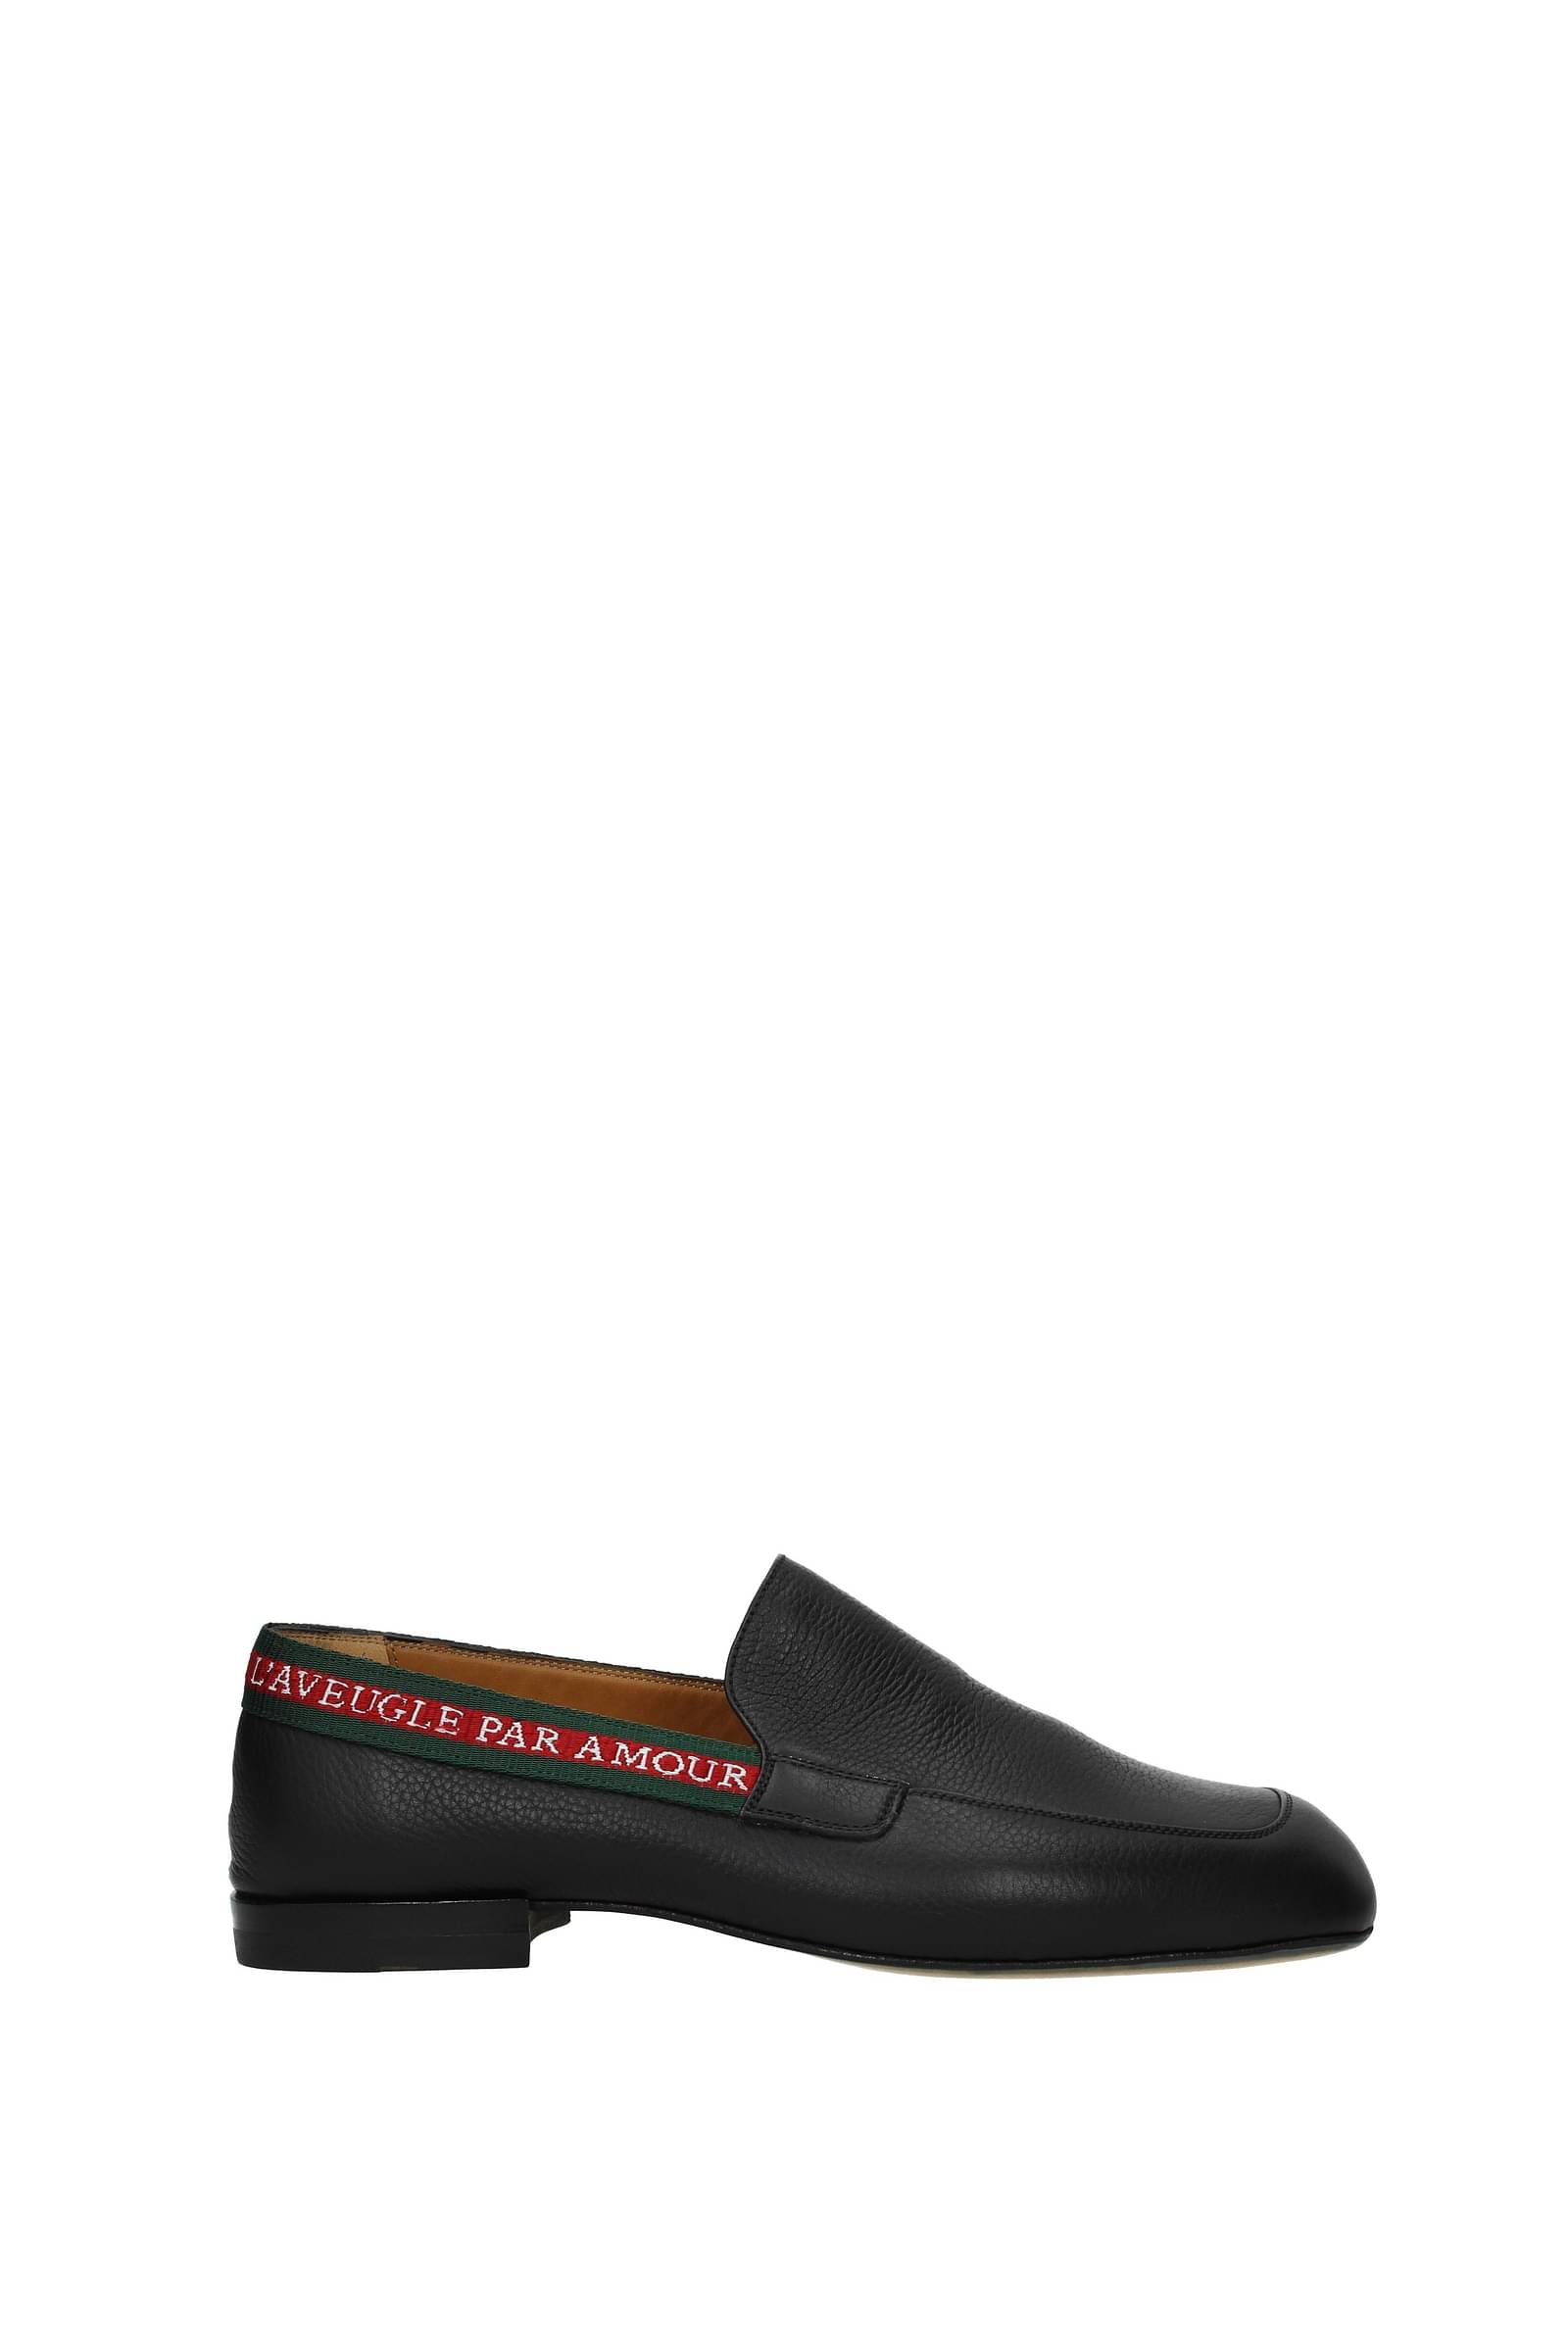 gucci outlet loafers